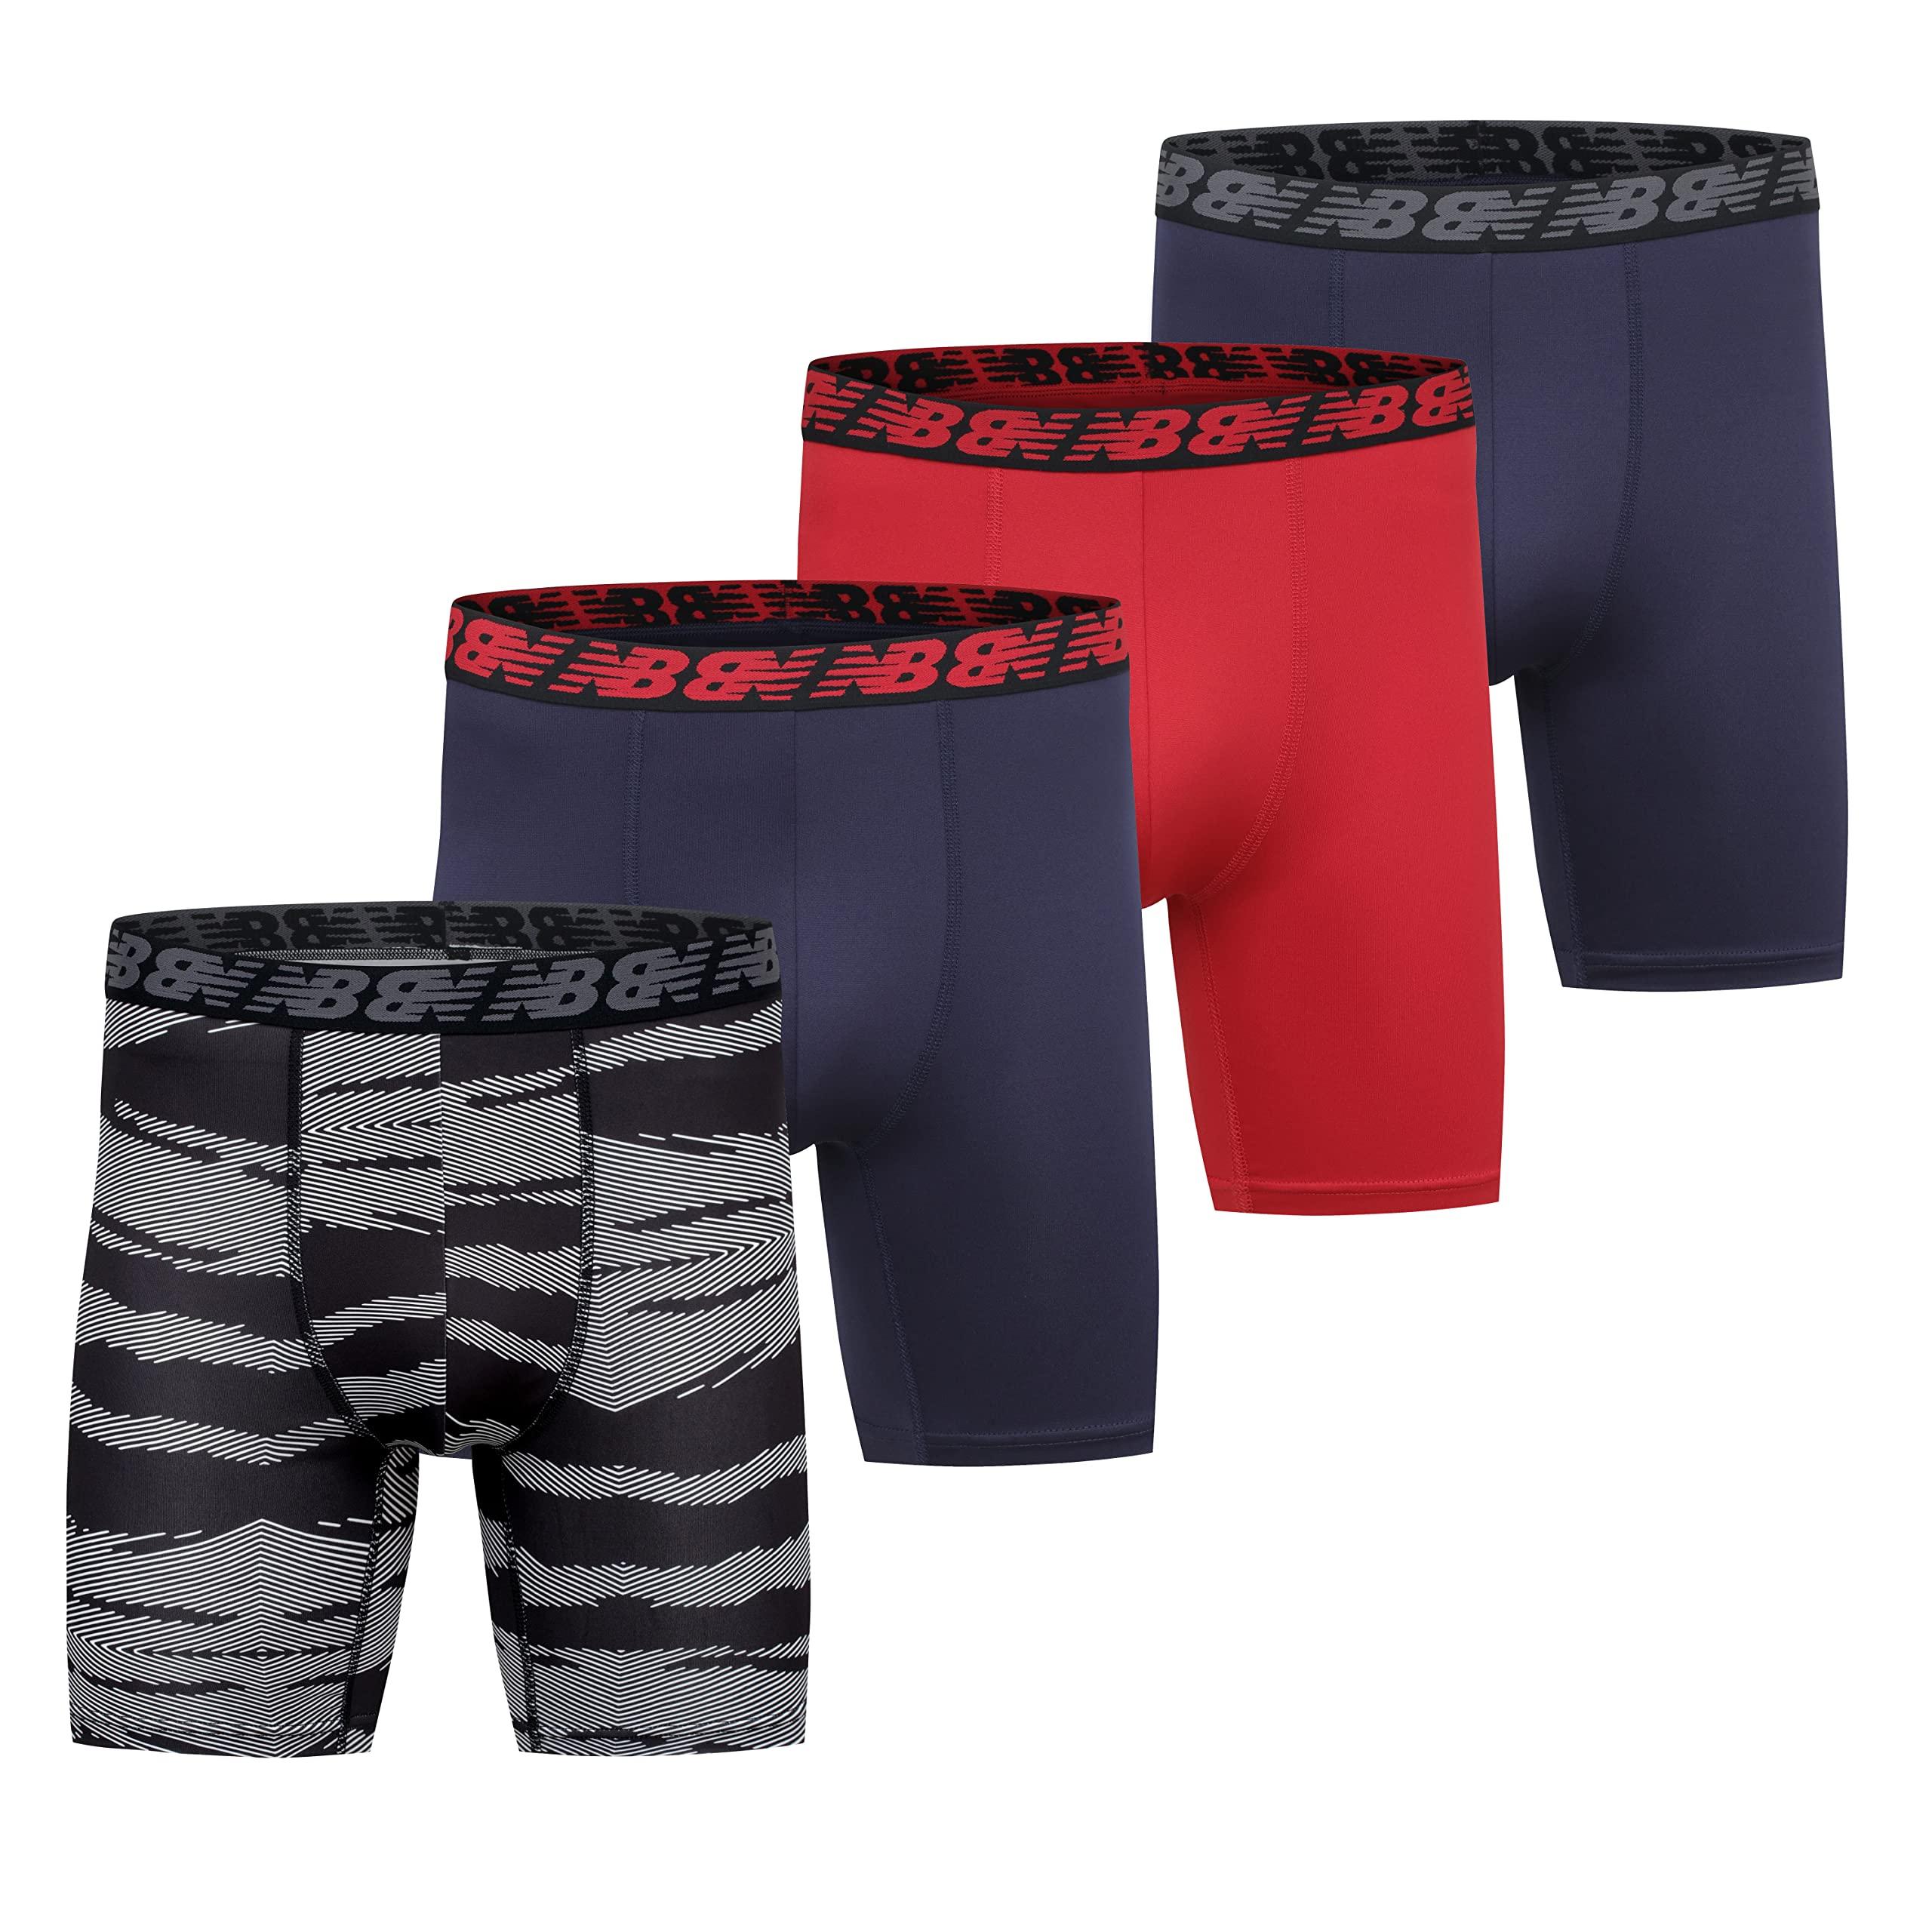 New Balance Standard 5 Performance No Fly Boxer Brief in Red for Men